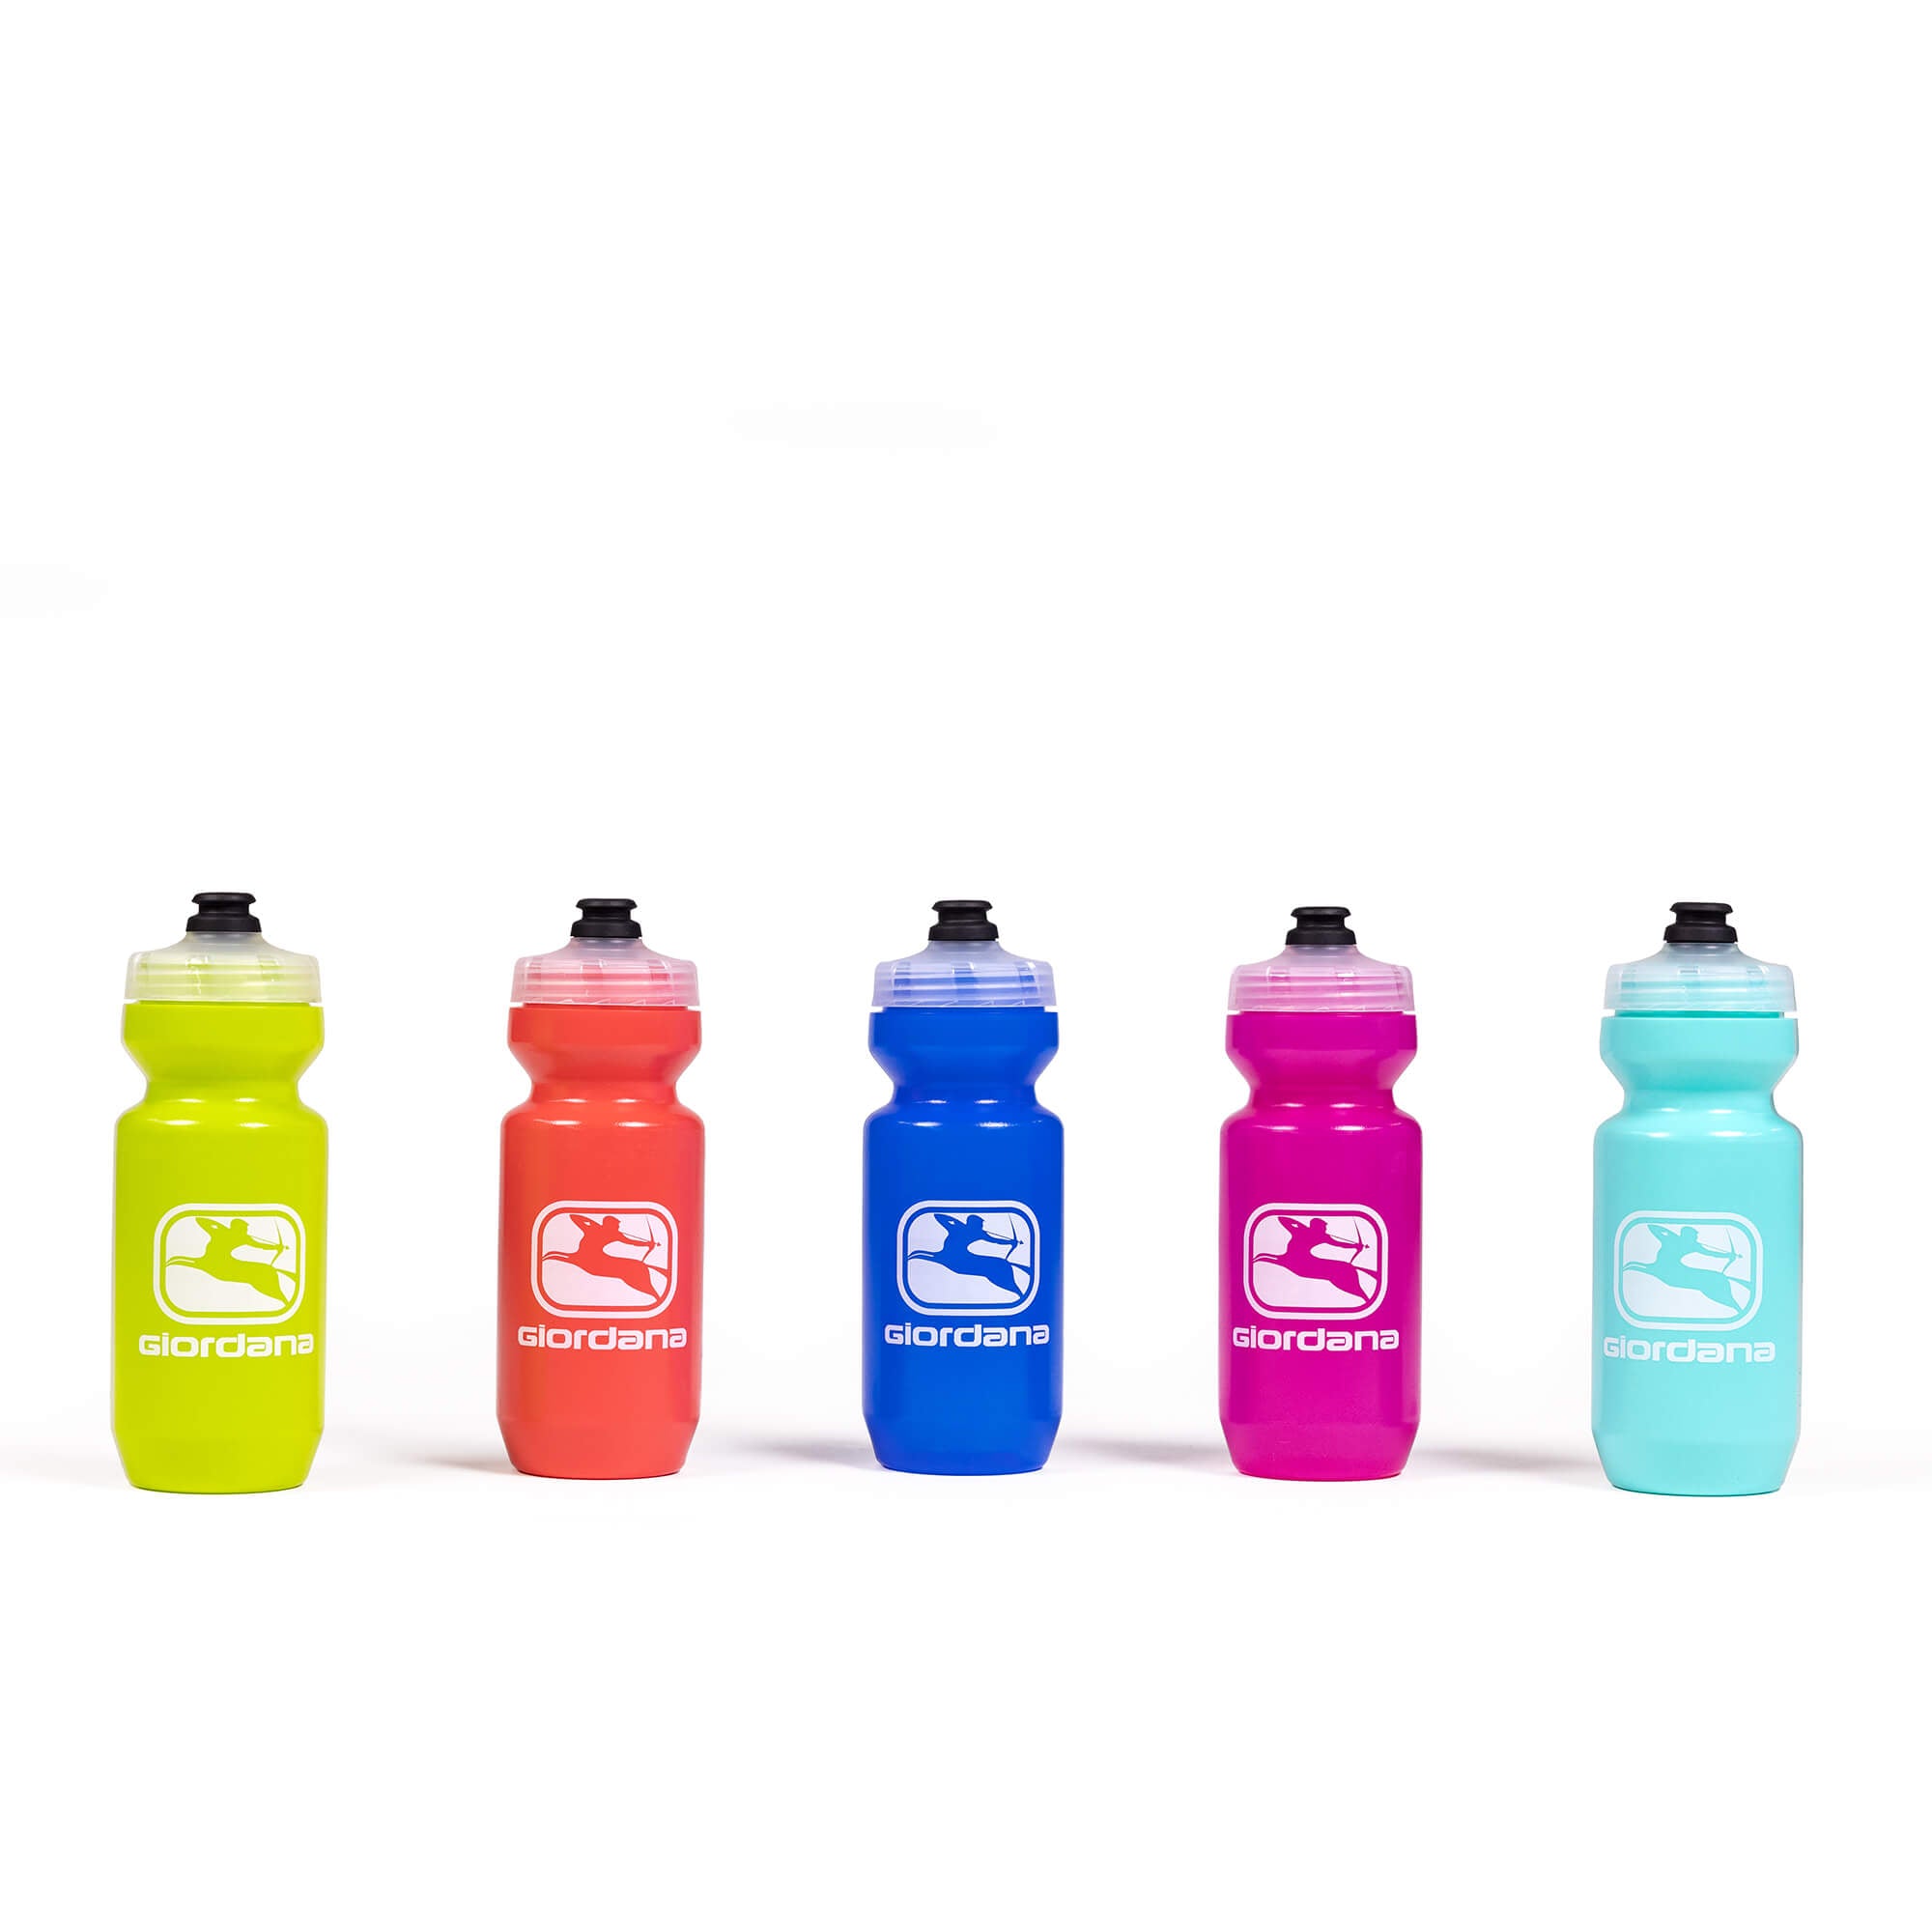 Hesroicy 700ml Cycling Water Bottle Wear Resistant Vibrant Color